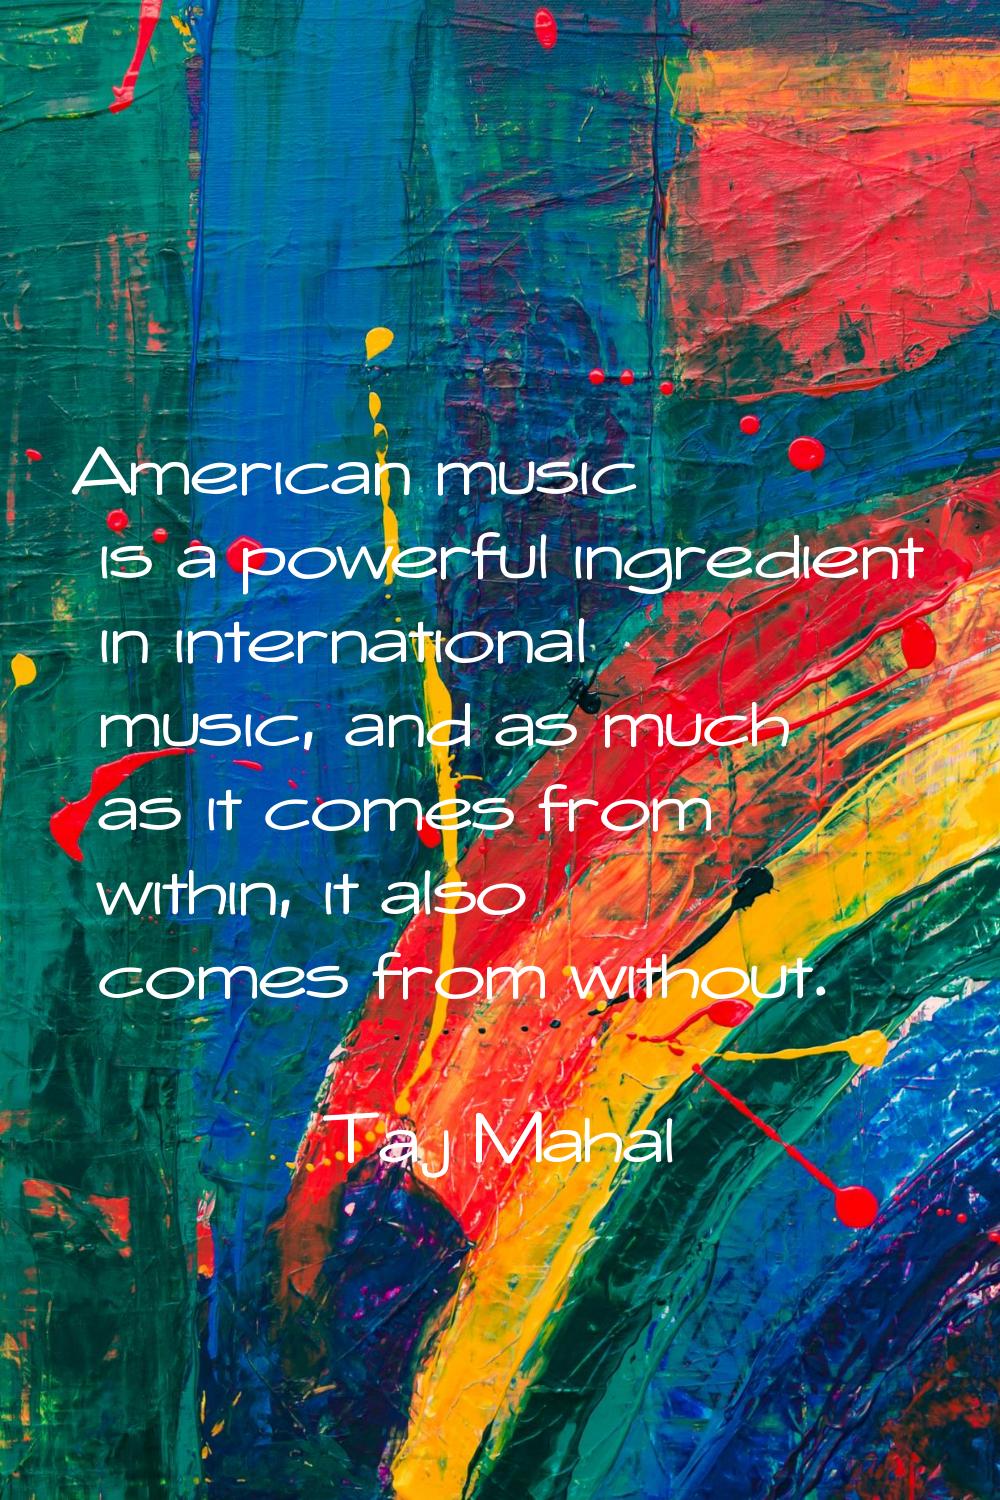 American music is a powerful ingredient in international music, and as much as it comes from within